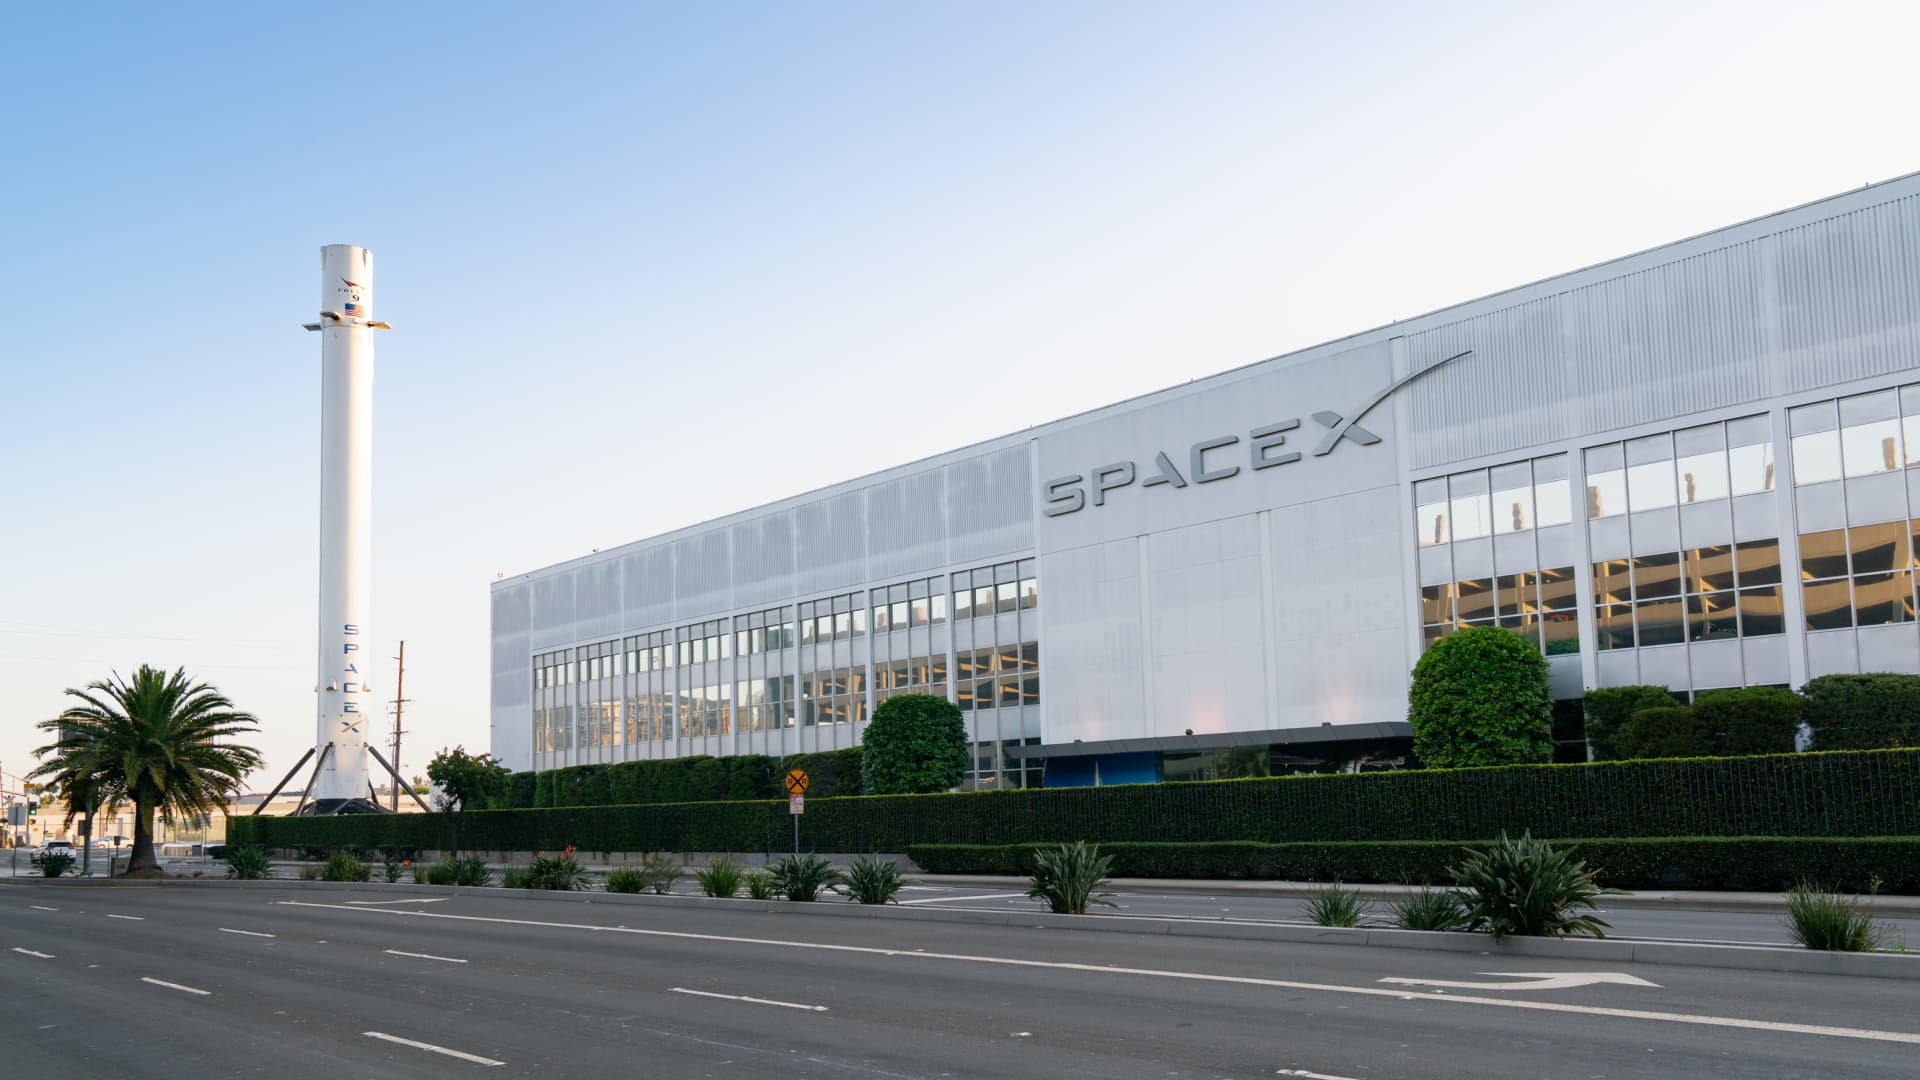 SpaceX headquarters in Los Angeles, California.